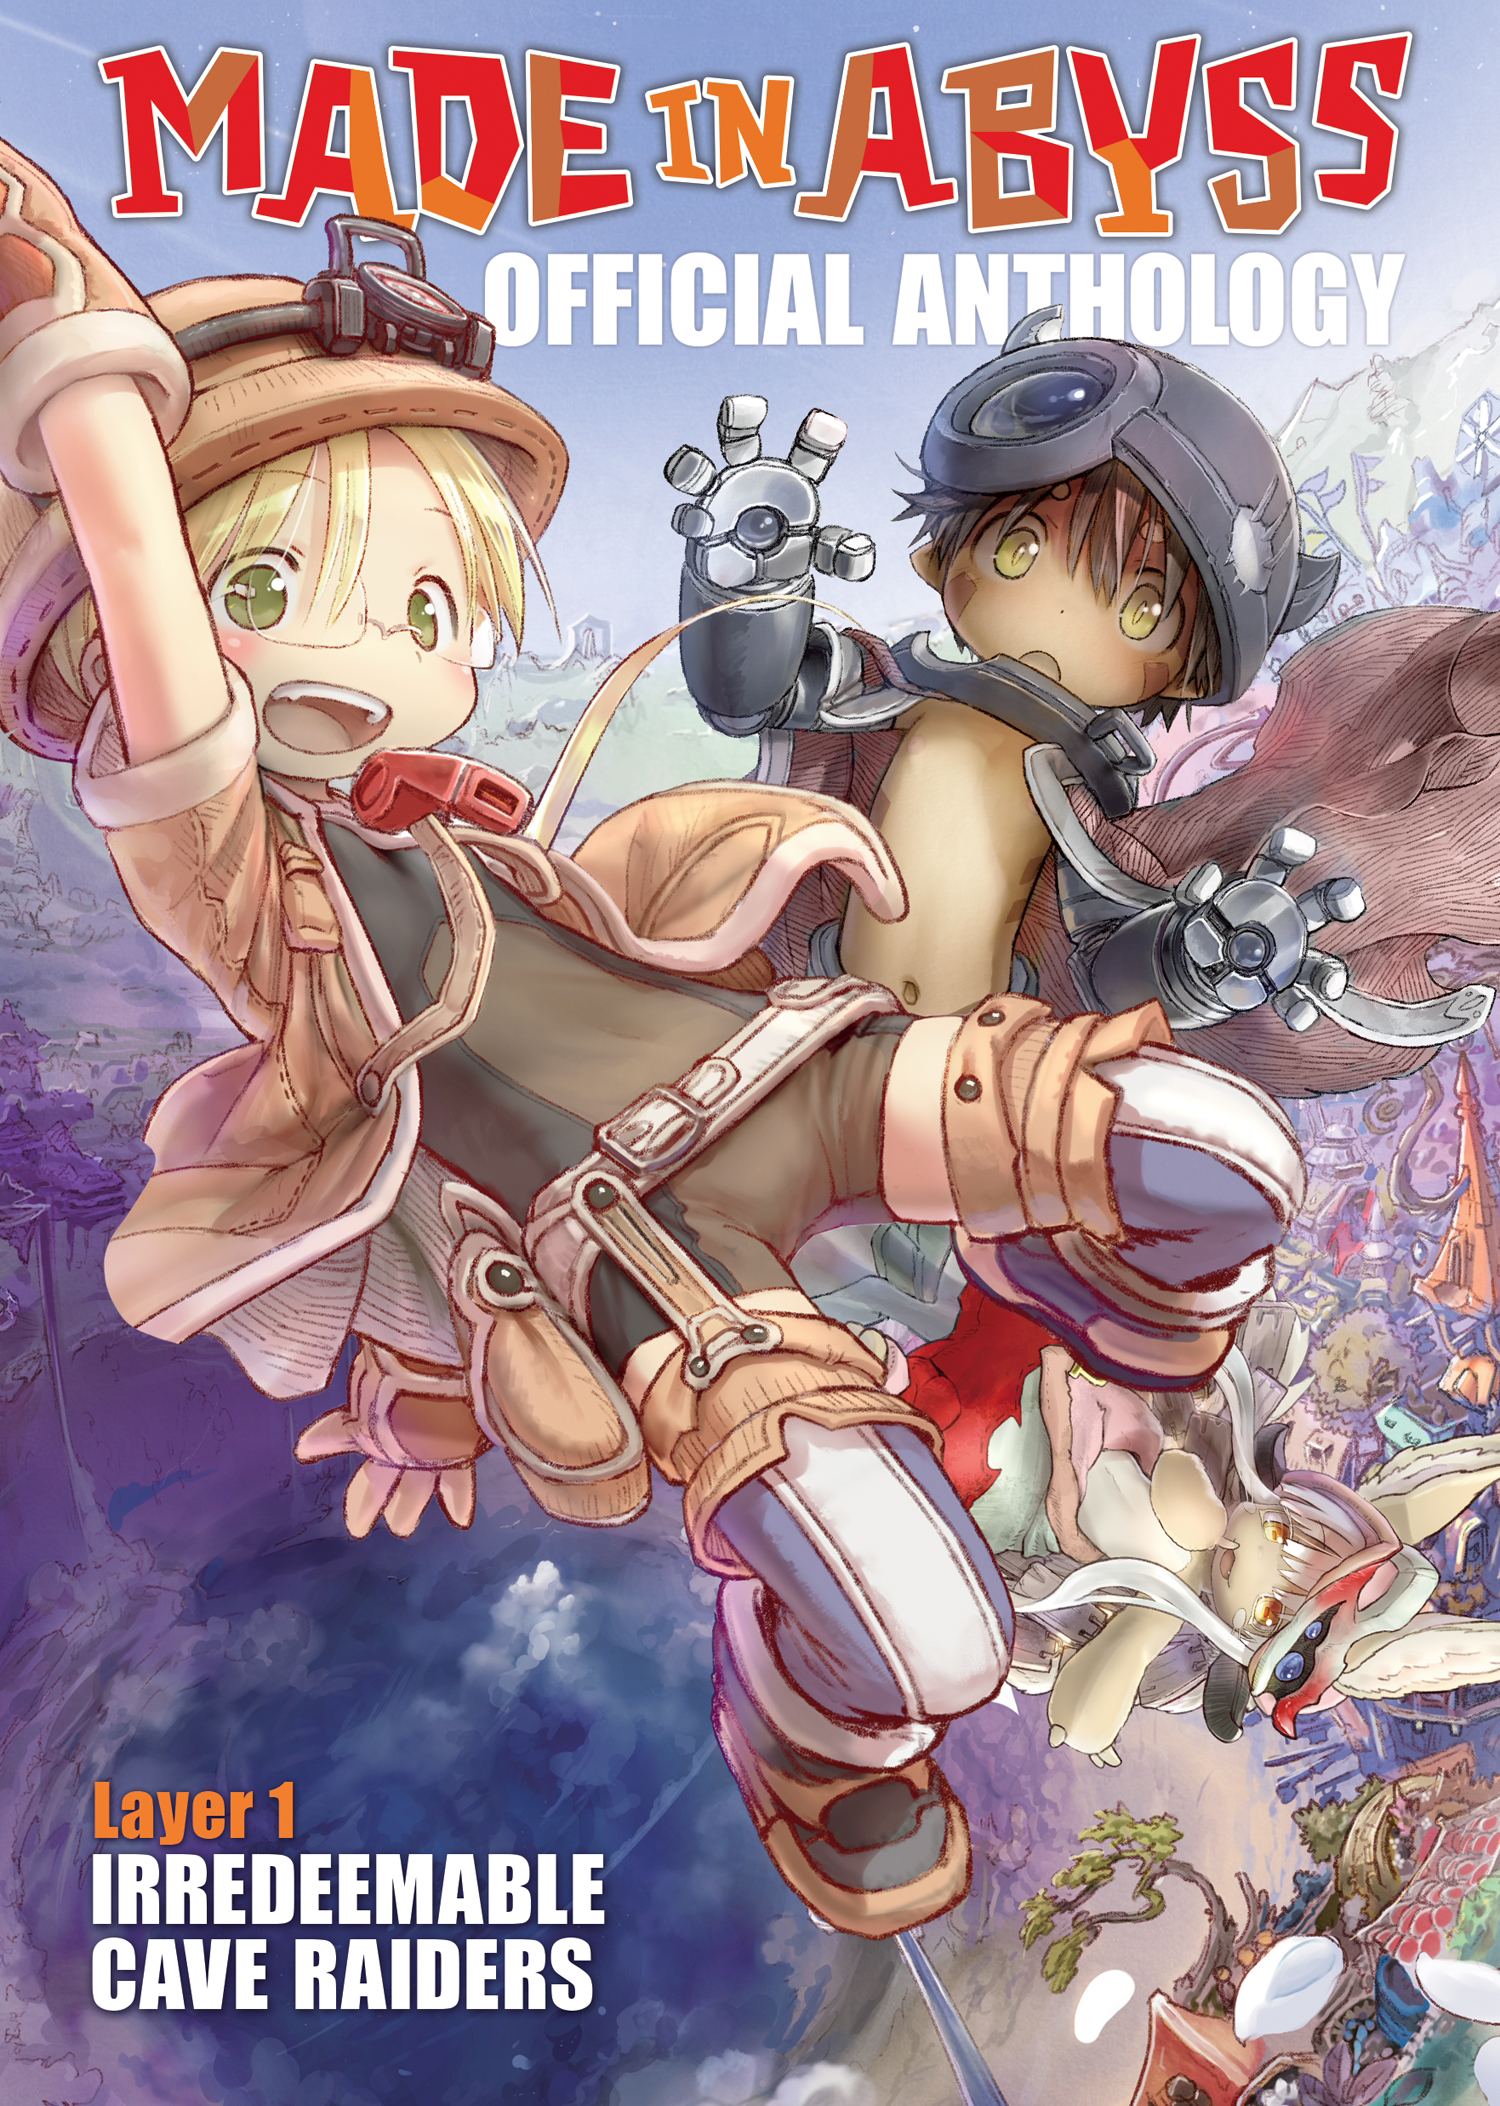 Is The Made in Abyss Manga Worth Reading?